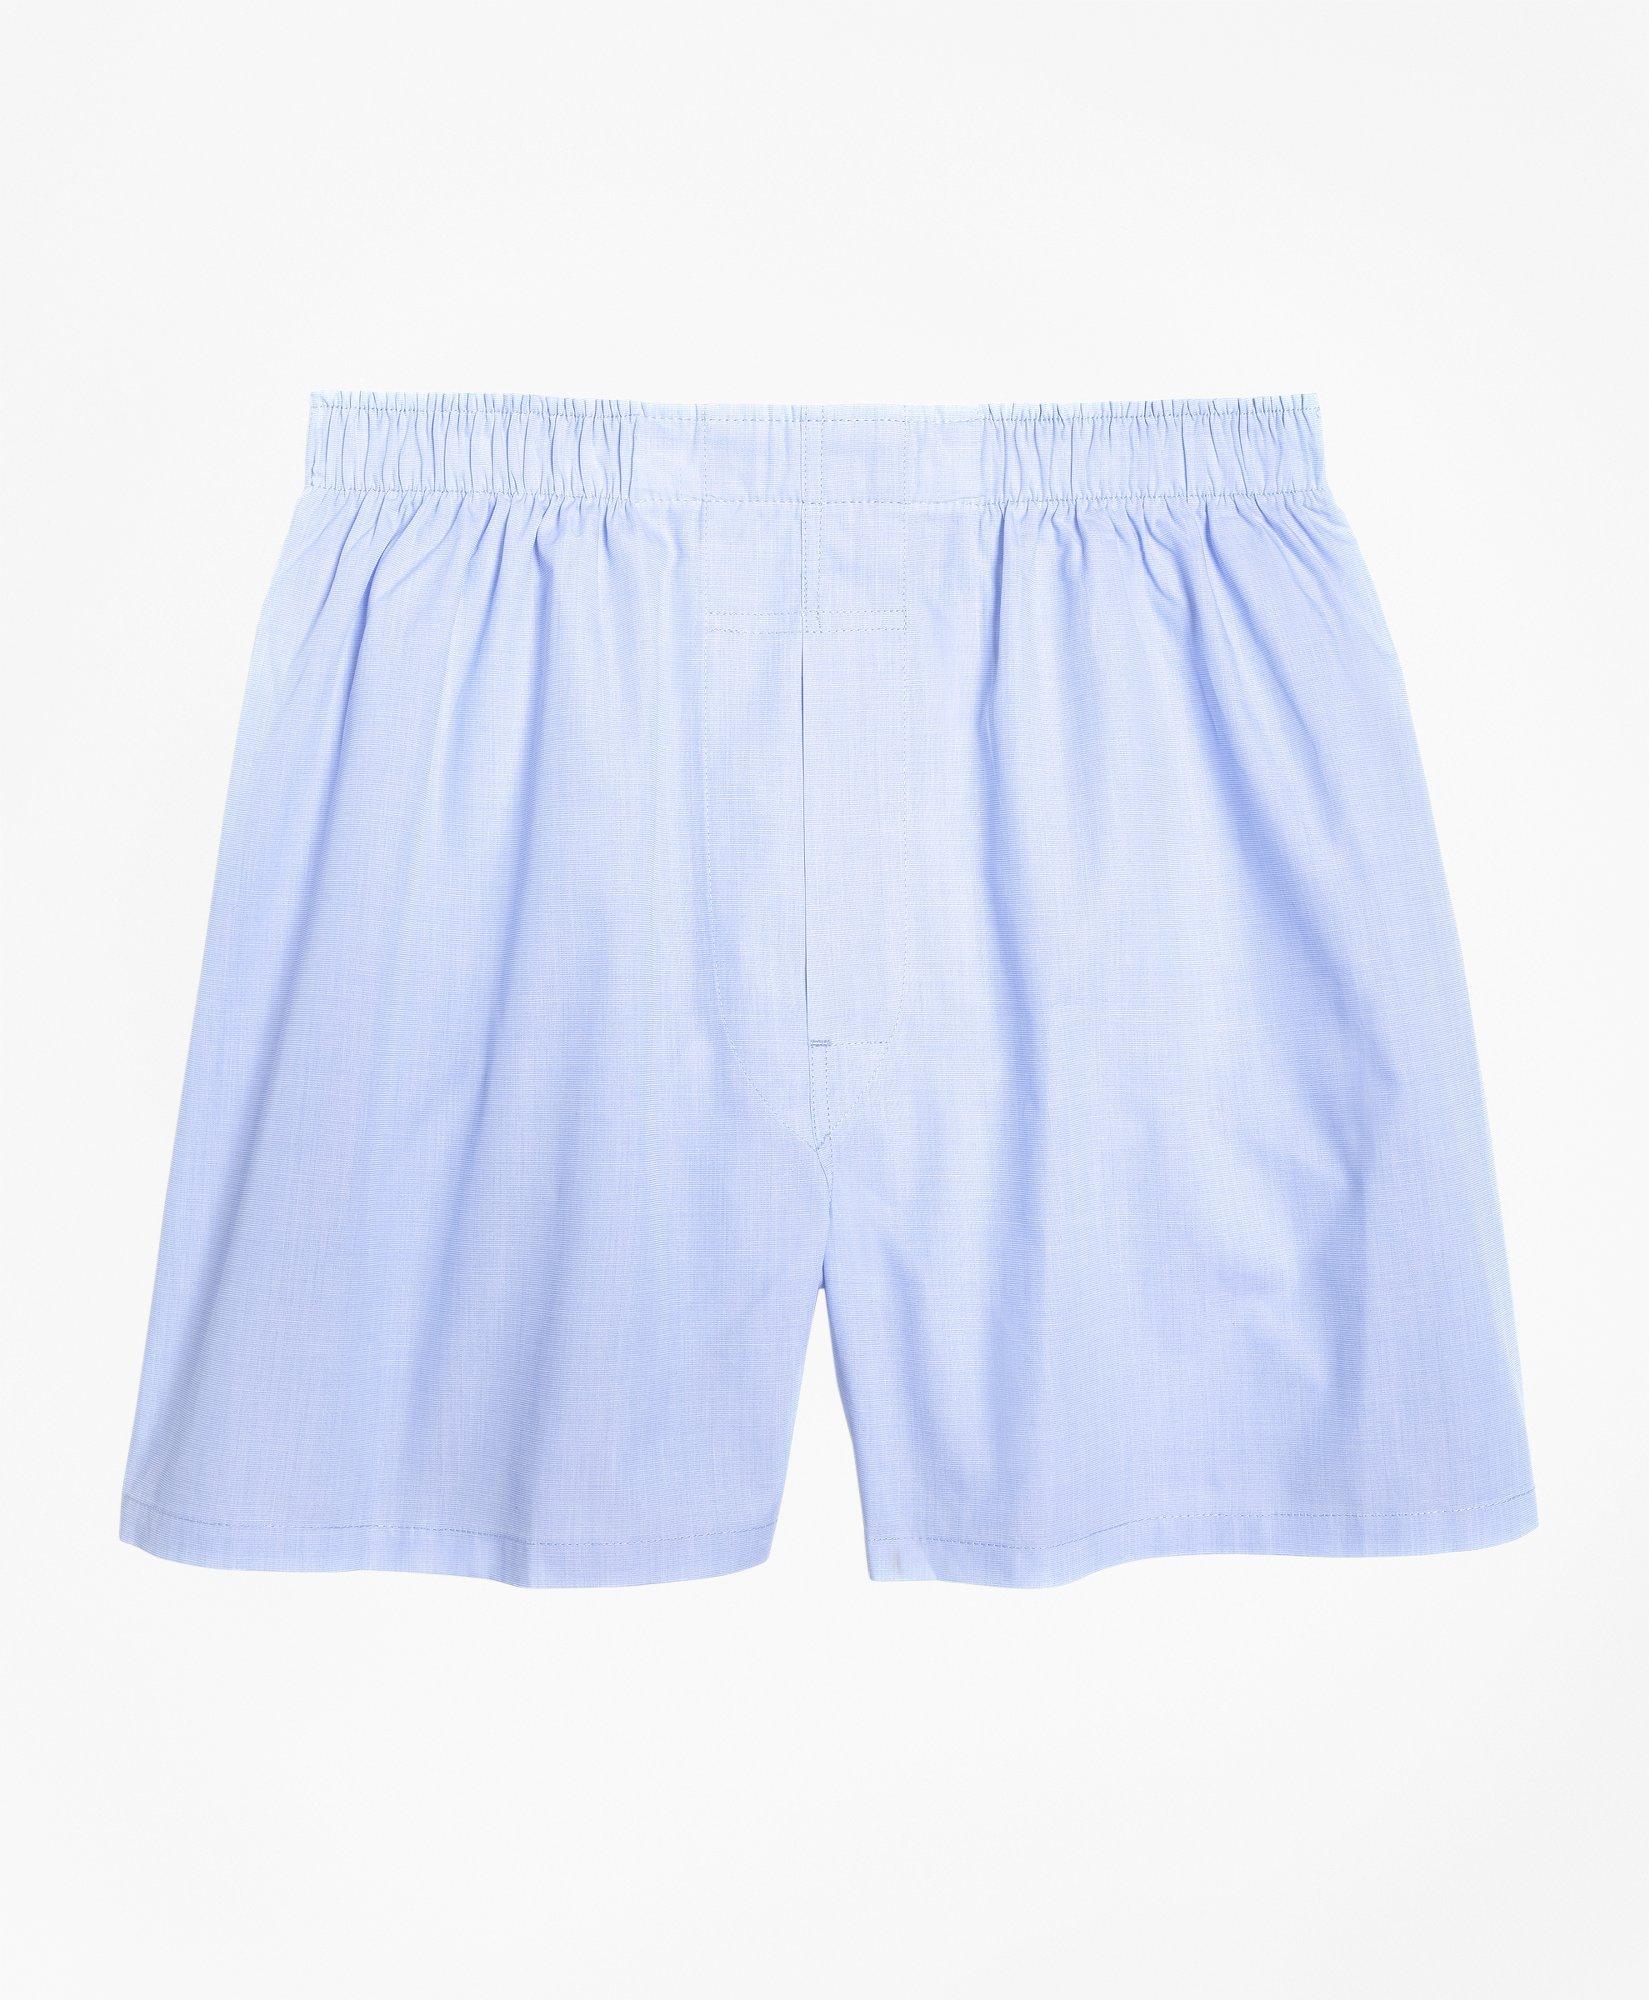 Classic Sports Cotton Boxer Shorts - Care Clothing